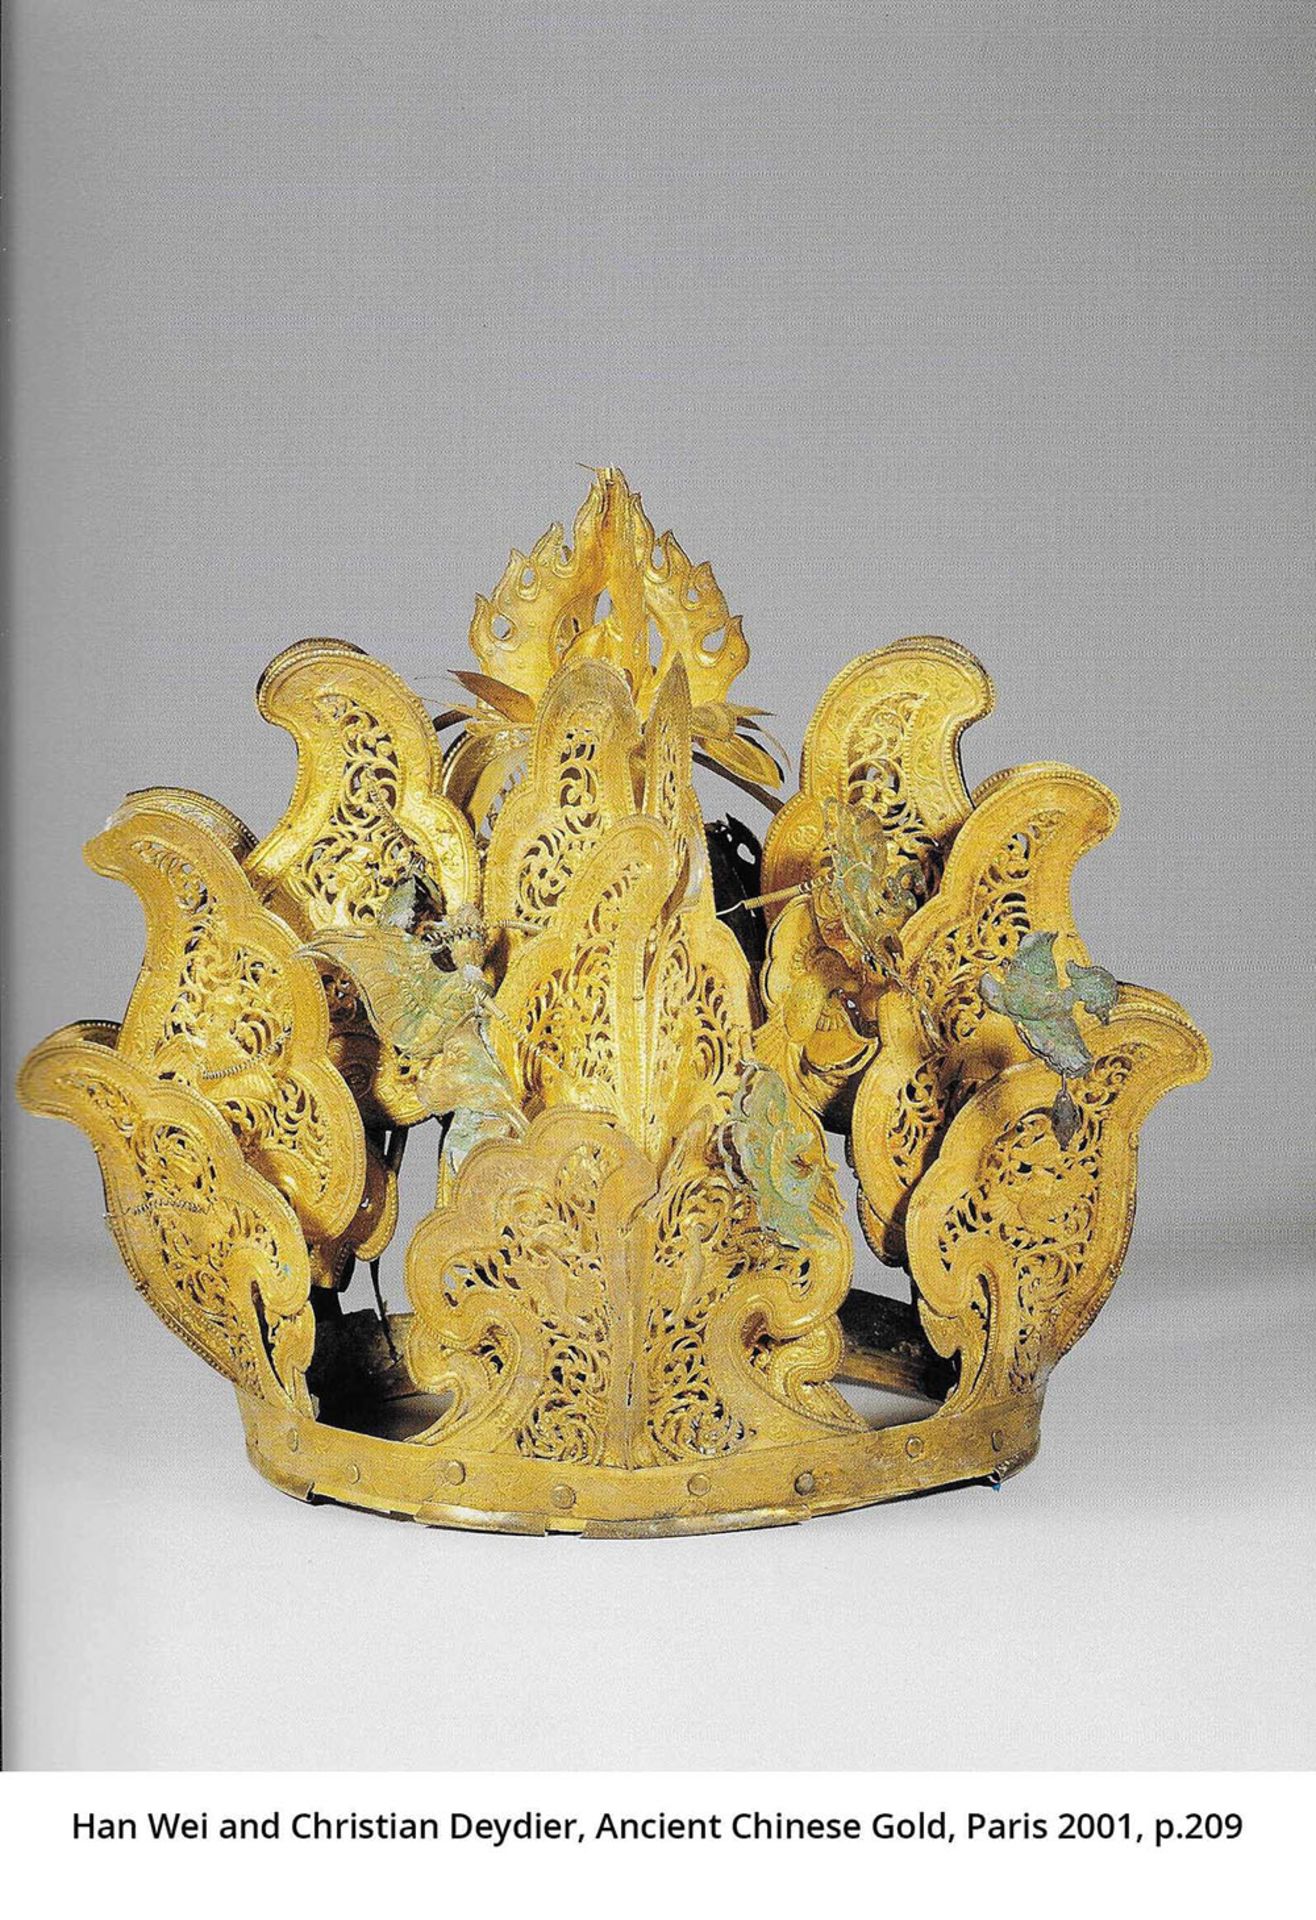 A LIAO DYNASTY GOLD REPOUSSÉ 'GUANYIN' FILIGREE ORNAMENT China, 916-1125. The Goddess of Mercy - Image 7 of 9